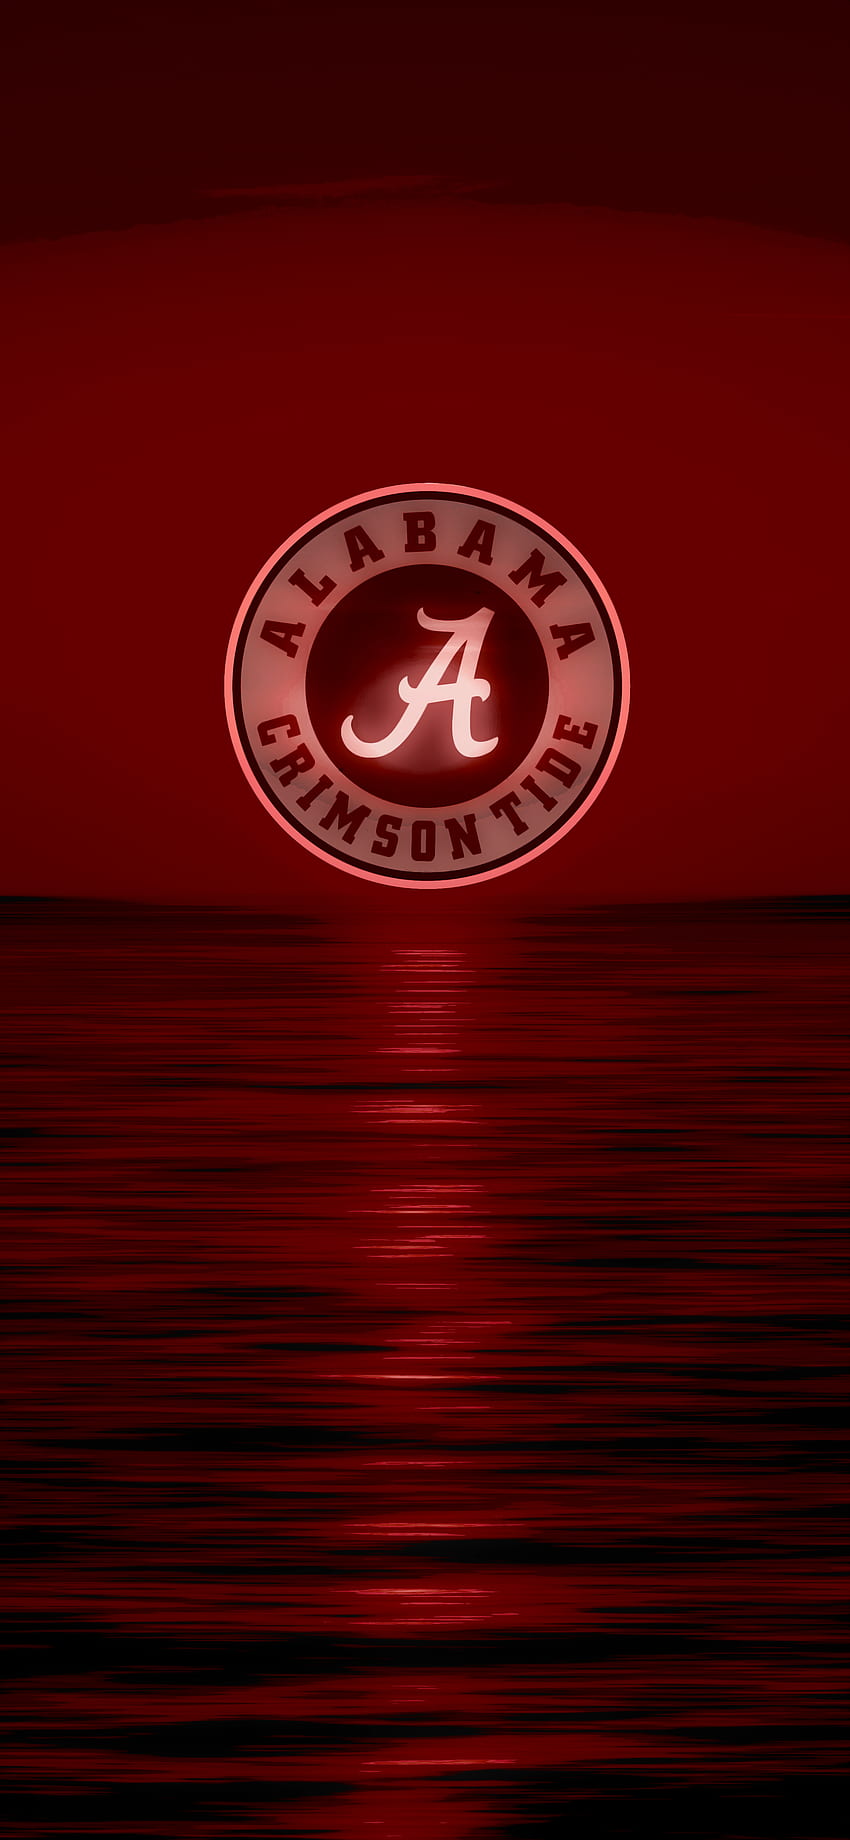 Alabama Crimson Tide iPhone Lock Screen Wallpaper with high-resolution 1080x1920 pixel. You can use this wallpaper for your iPhone 5, 6, 7, 8, X, XS, XR backgrounds, Mobile Screensaver, or iPad Lock Screen - Crimson